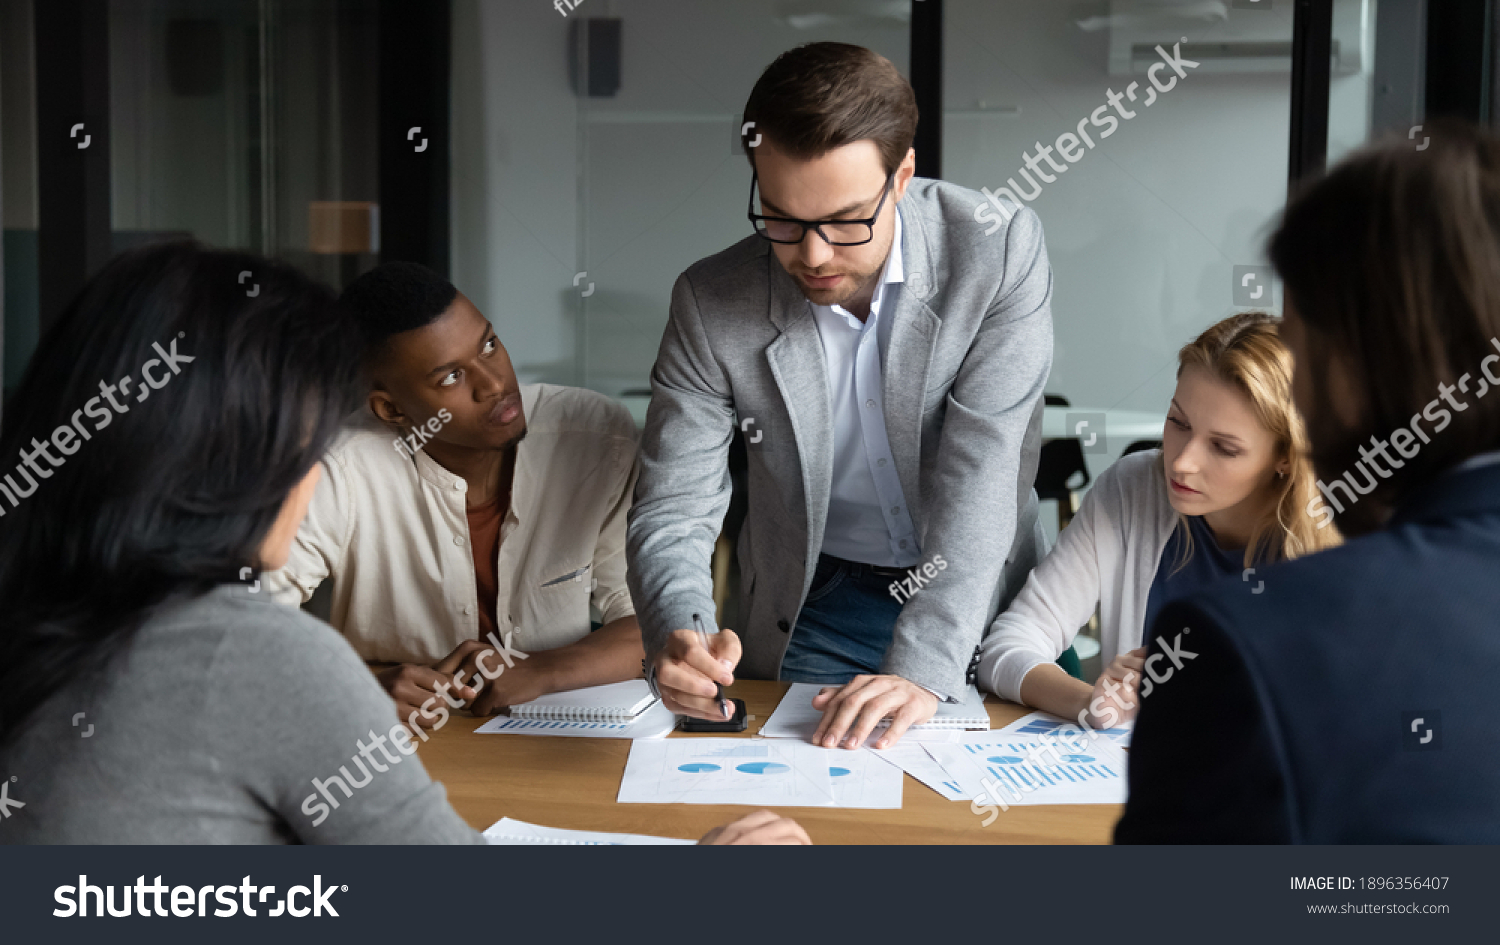 Skilled focused young businessman boss leader in eyeglasses analyzing sales data statistics or explaining marketing strategy to motivated diverse multiracial colleagues at brainstorming meeting. #1896356407